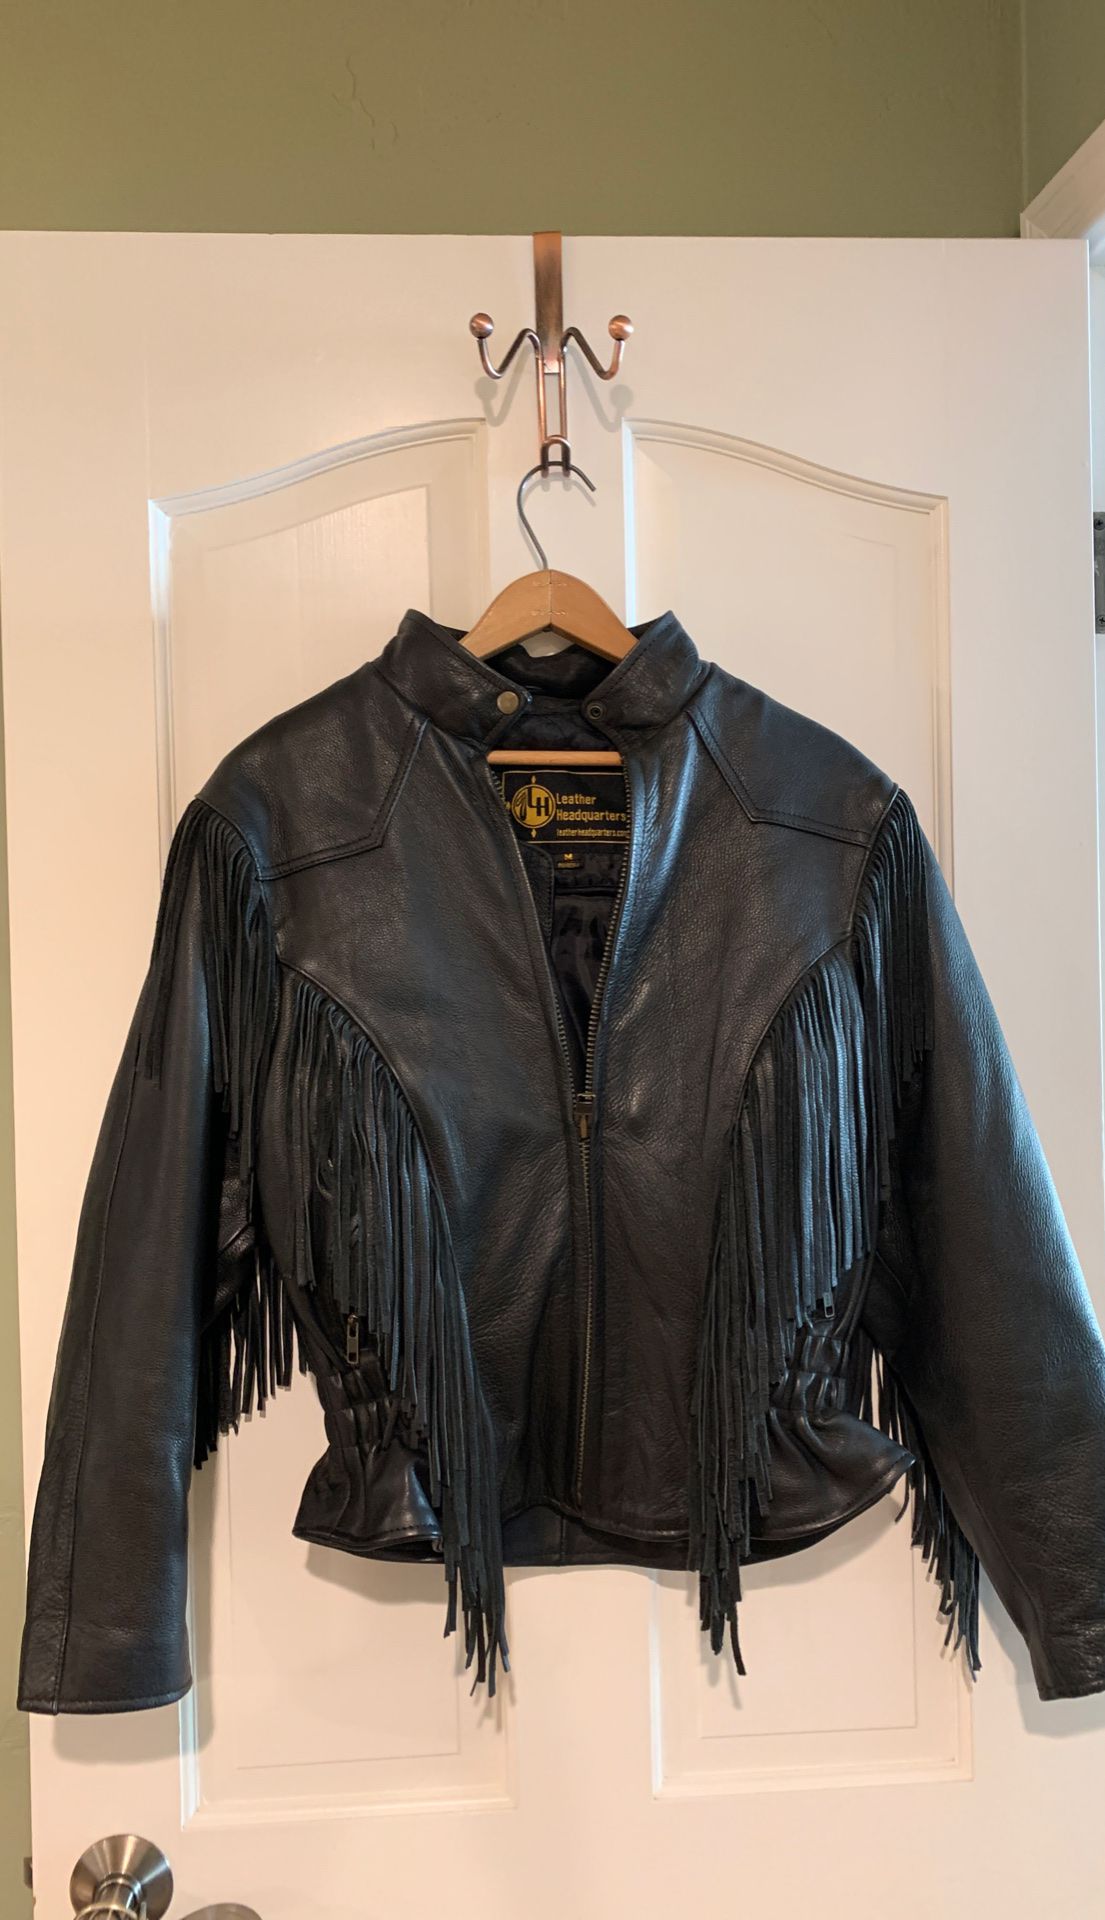 Motorcycle clothing - women’s